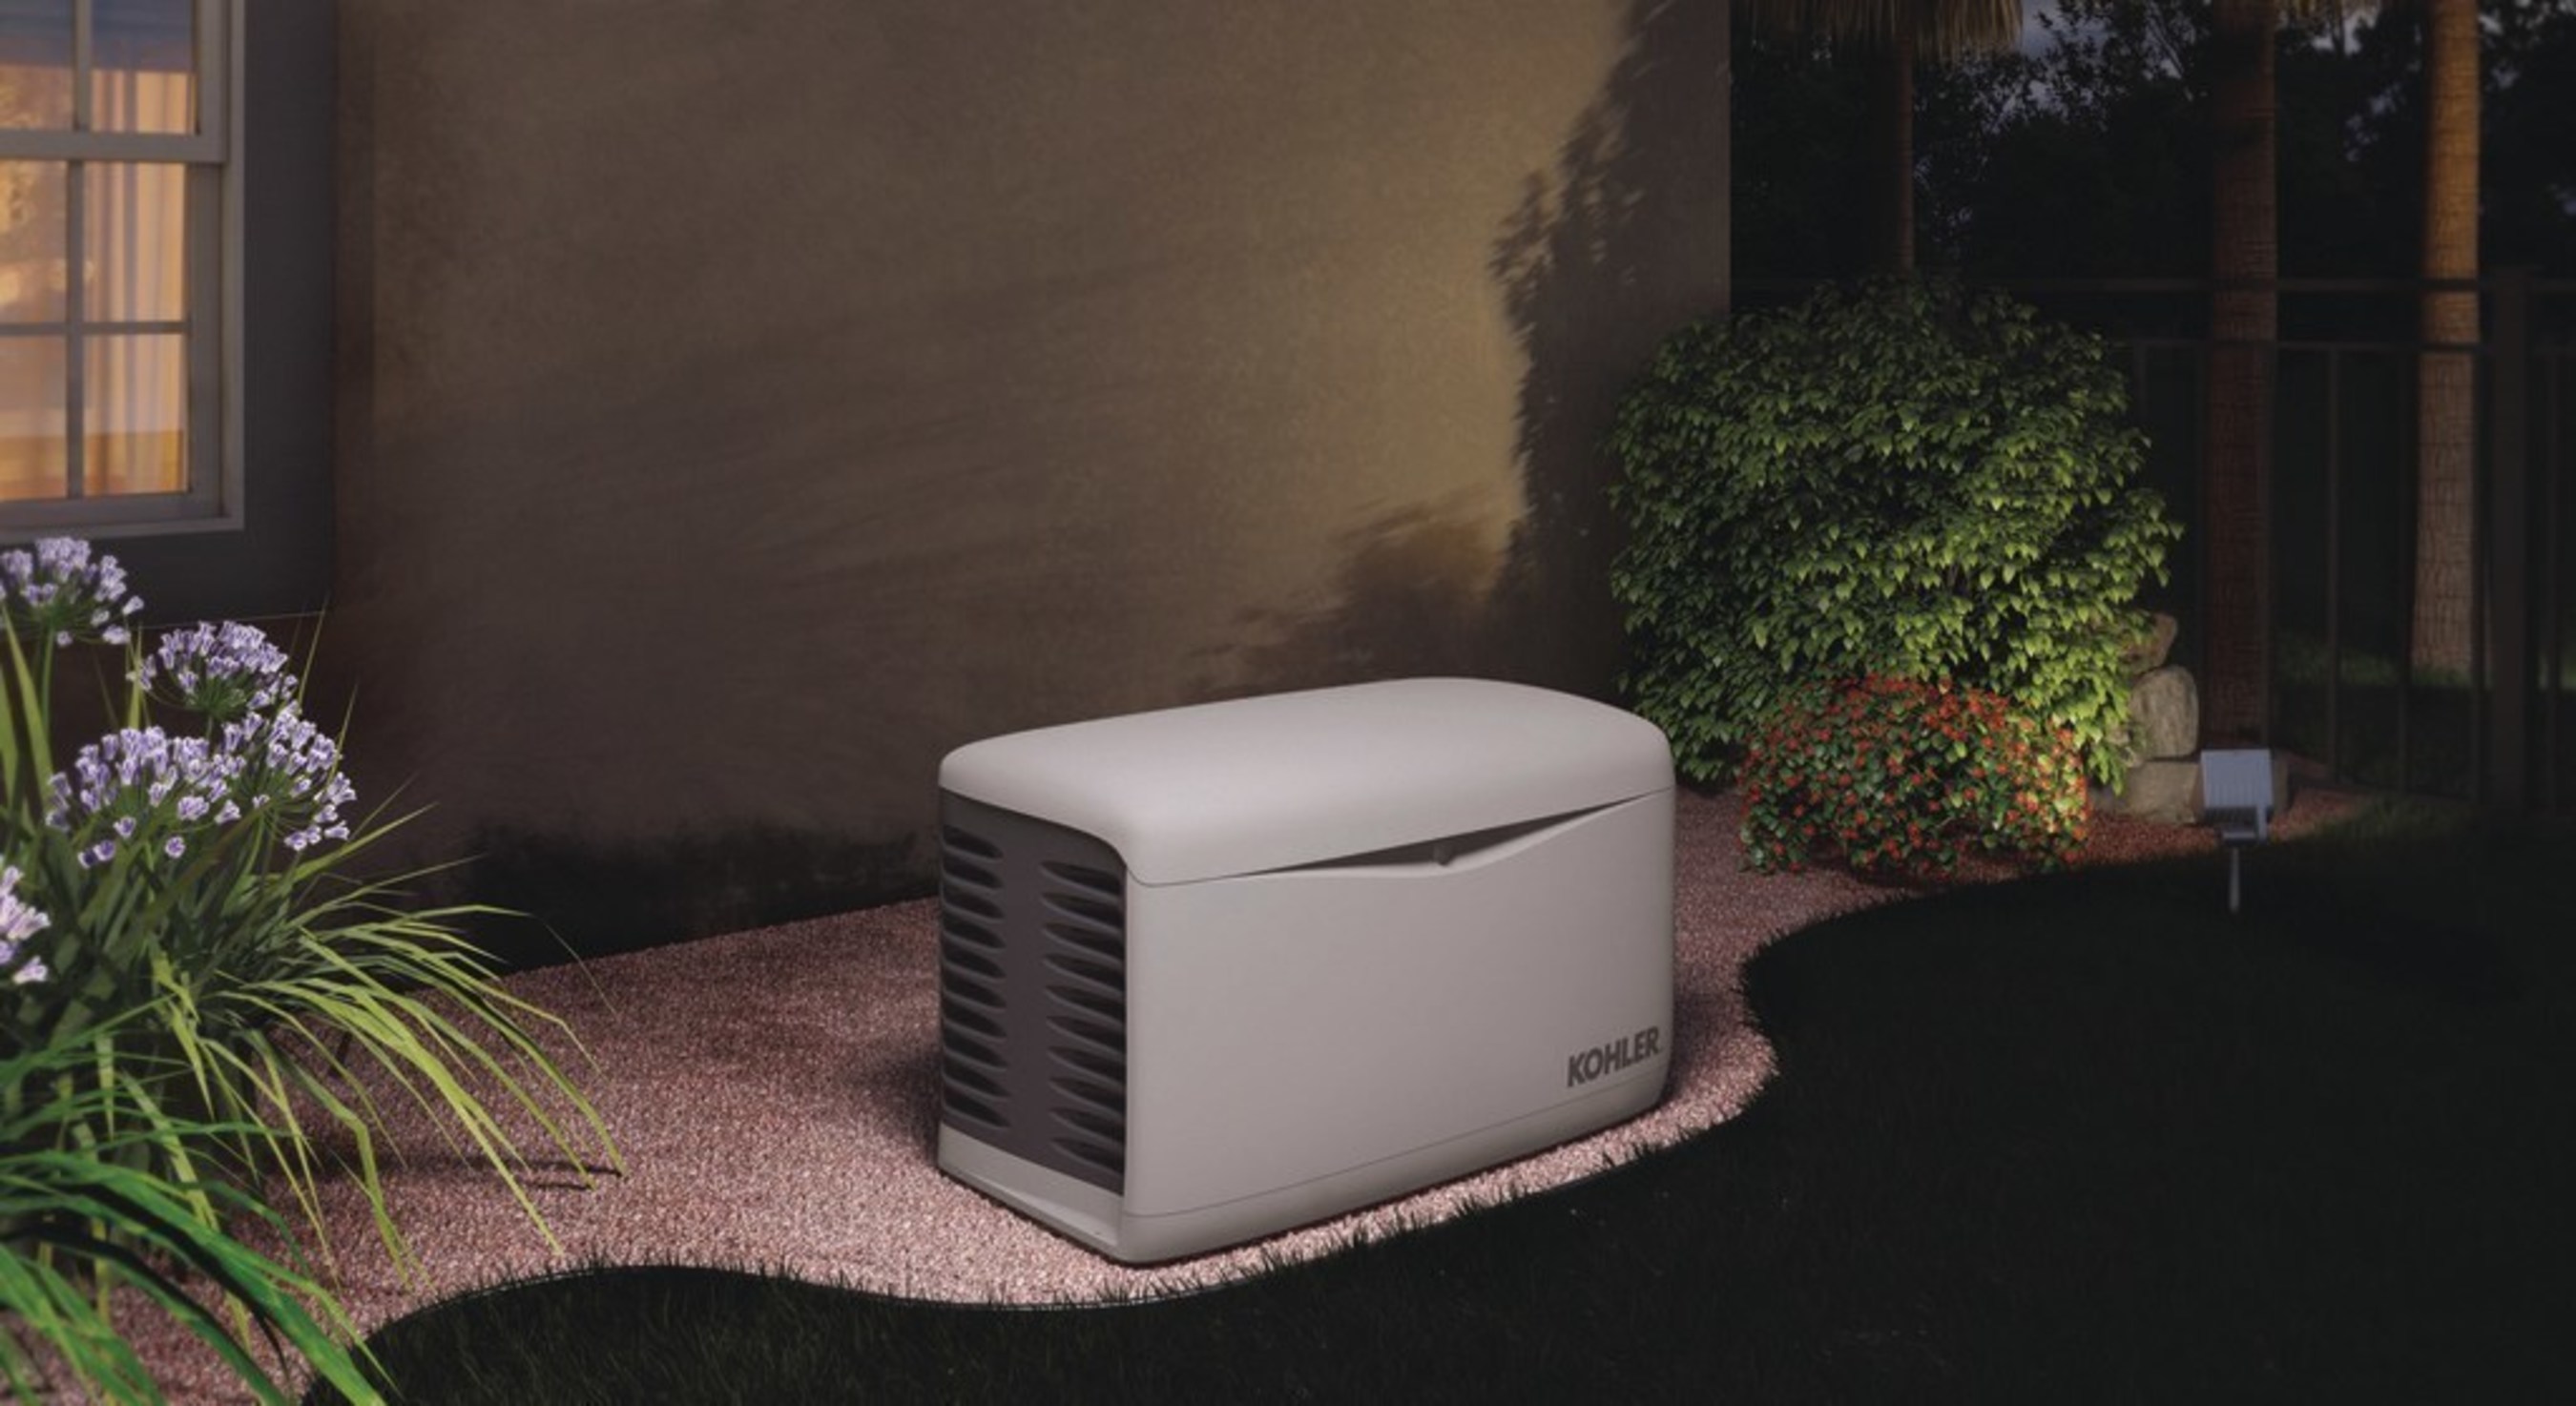 An automatic standby generator is permanently installed outside a home, similar to a central air conditioning unit, and runs on natural gas or propane using existing gas lines. When power is lost to the home, a standby generator automatically turns on - typically within 10 seconds - and can power all critical systems and appliances within the home. Homeowners do not need to be present to operate or refuel the generator.